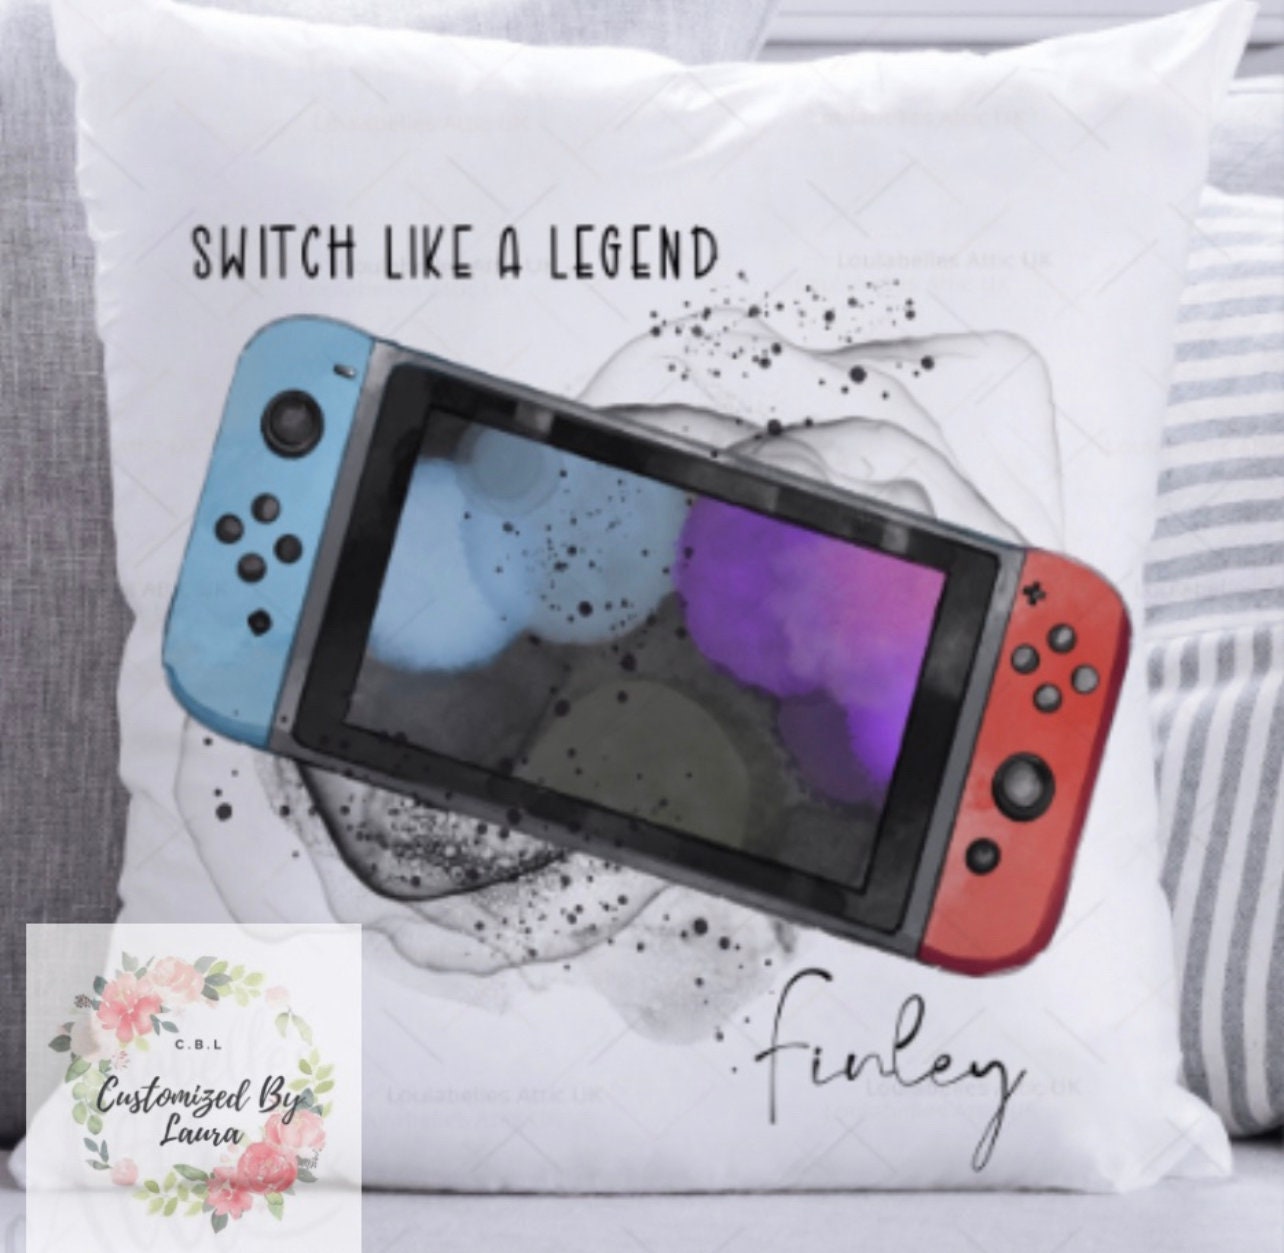 Buy Gaming Cushion Online In India -  India